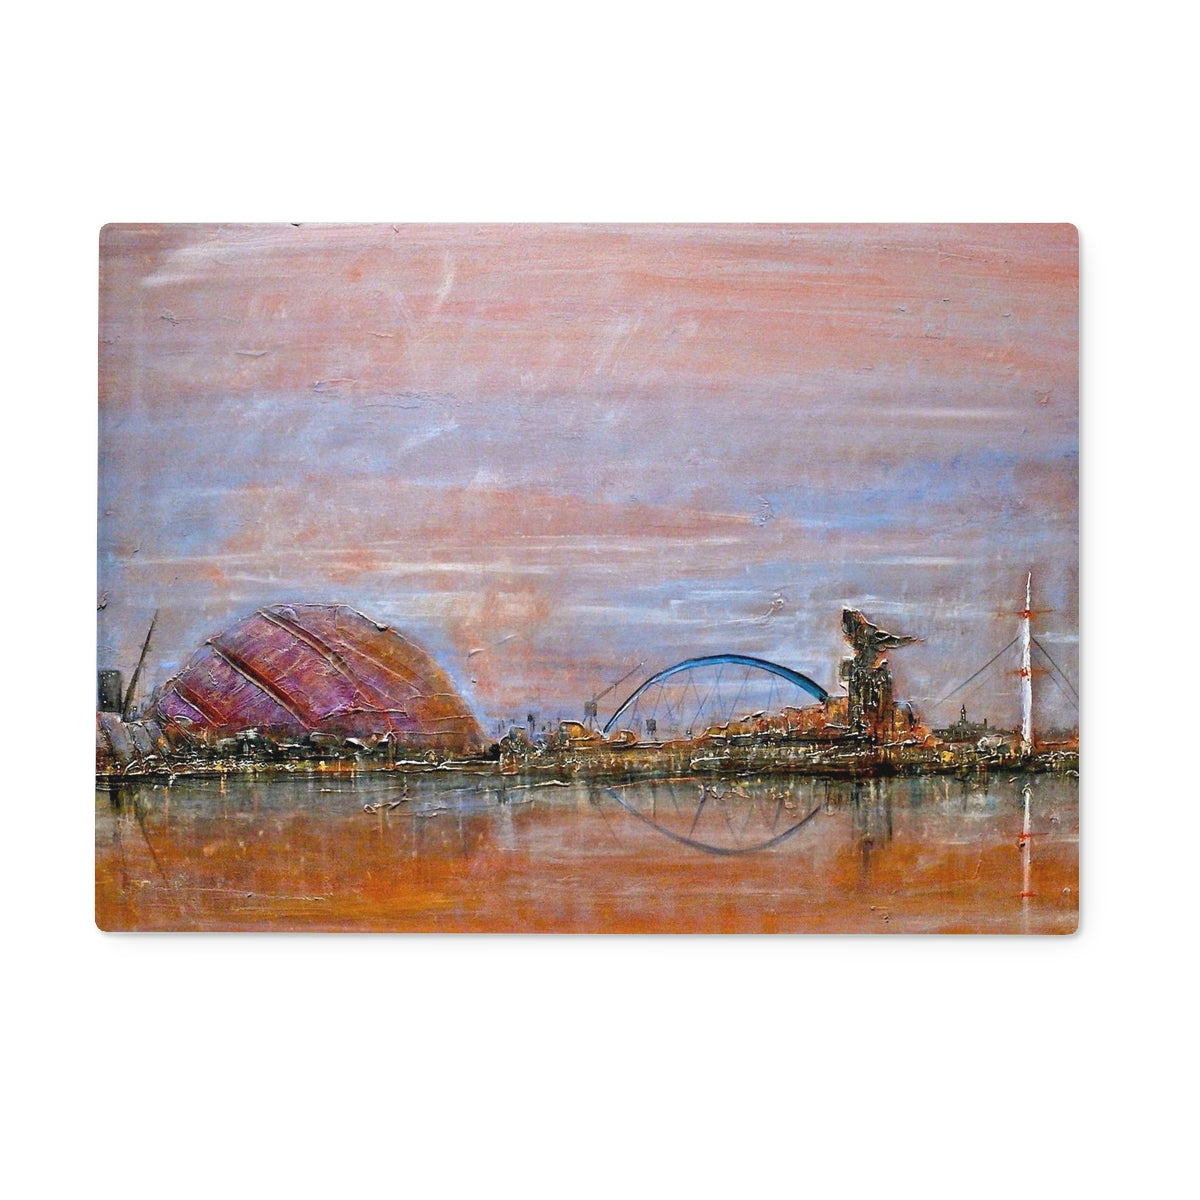 Glasgow Harbour Art Gifts Glass Chopping Board-Glass Chopping Boards-Edinburgh & Glasgow Art Gallery-15"x11" Rectangular-Paintings, Prints, Homeware, Art Gifts From Scotland By Scottish Artist Kevin Hunter